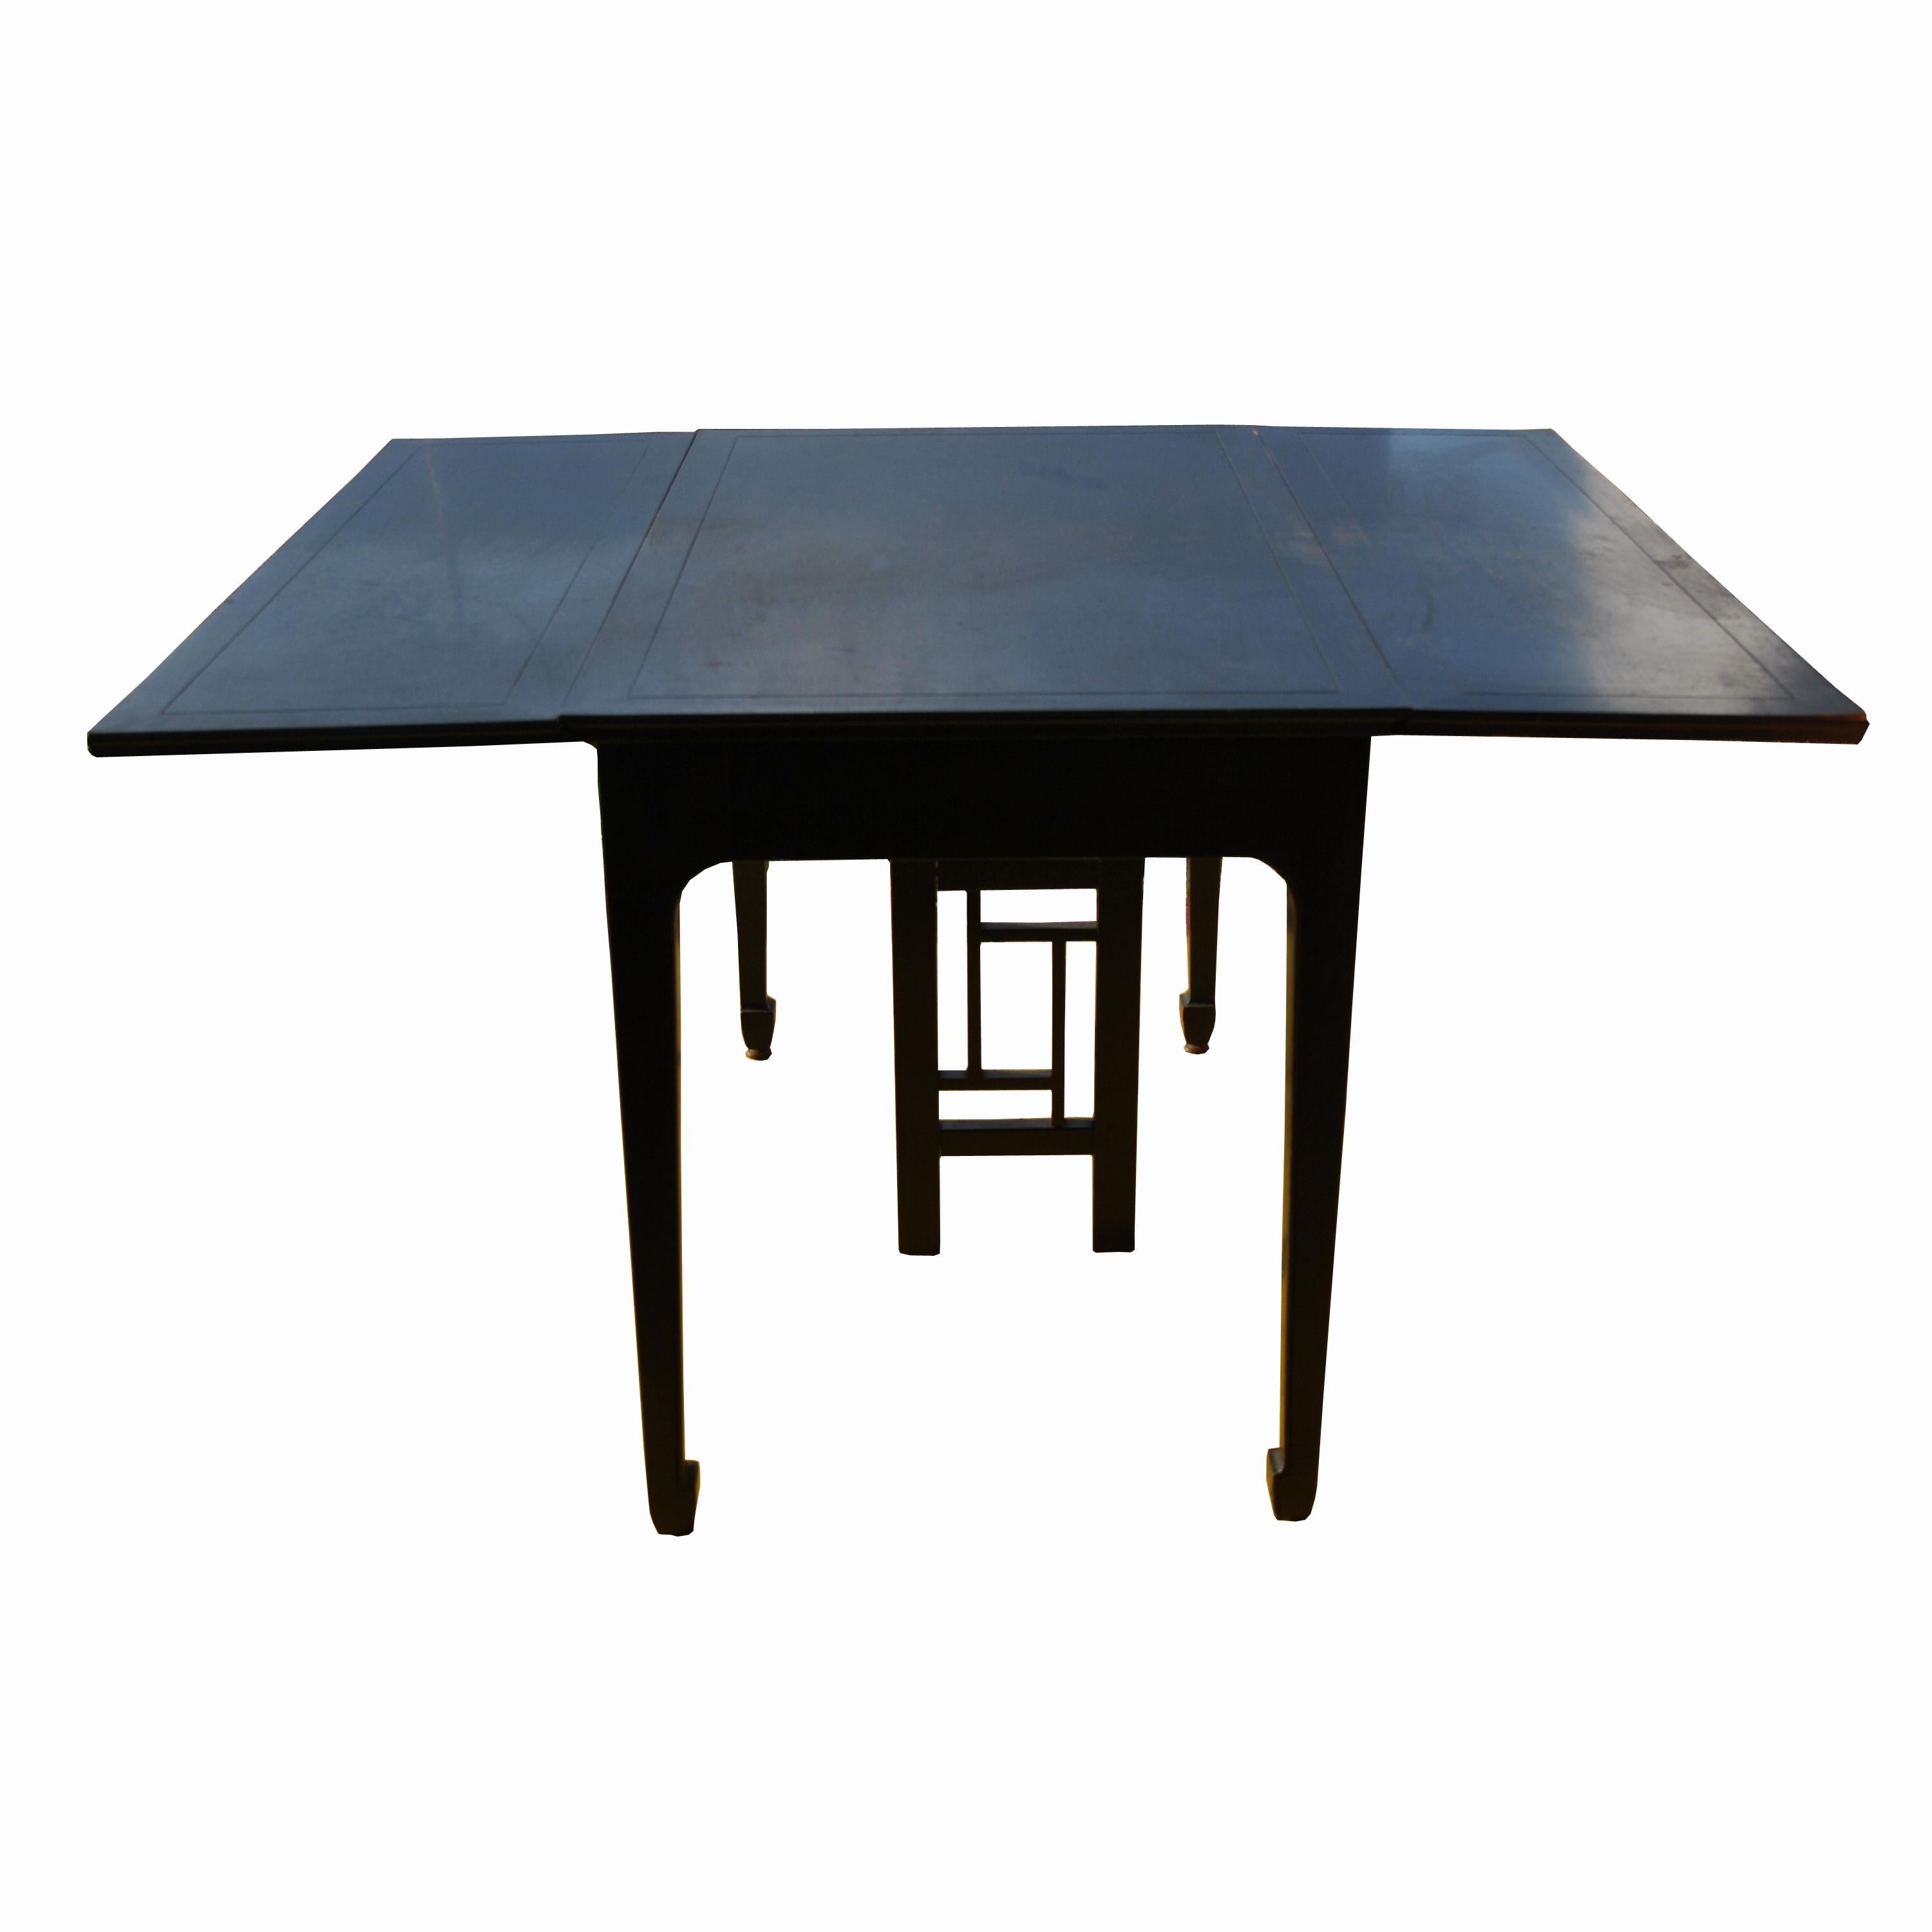 Far East collection 
 
1960s.
A dining table designed by Michael Taylor and made by Baker showing an Asian influence. Solid construction in an ebonized walnut finish.
Incised apron and tapered Ming style legs.
4 leaves 
Table extends to 8 ft.